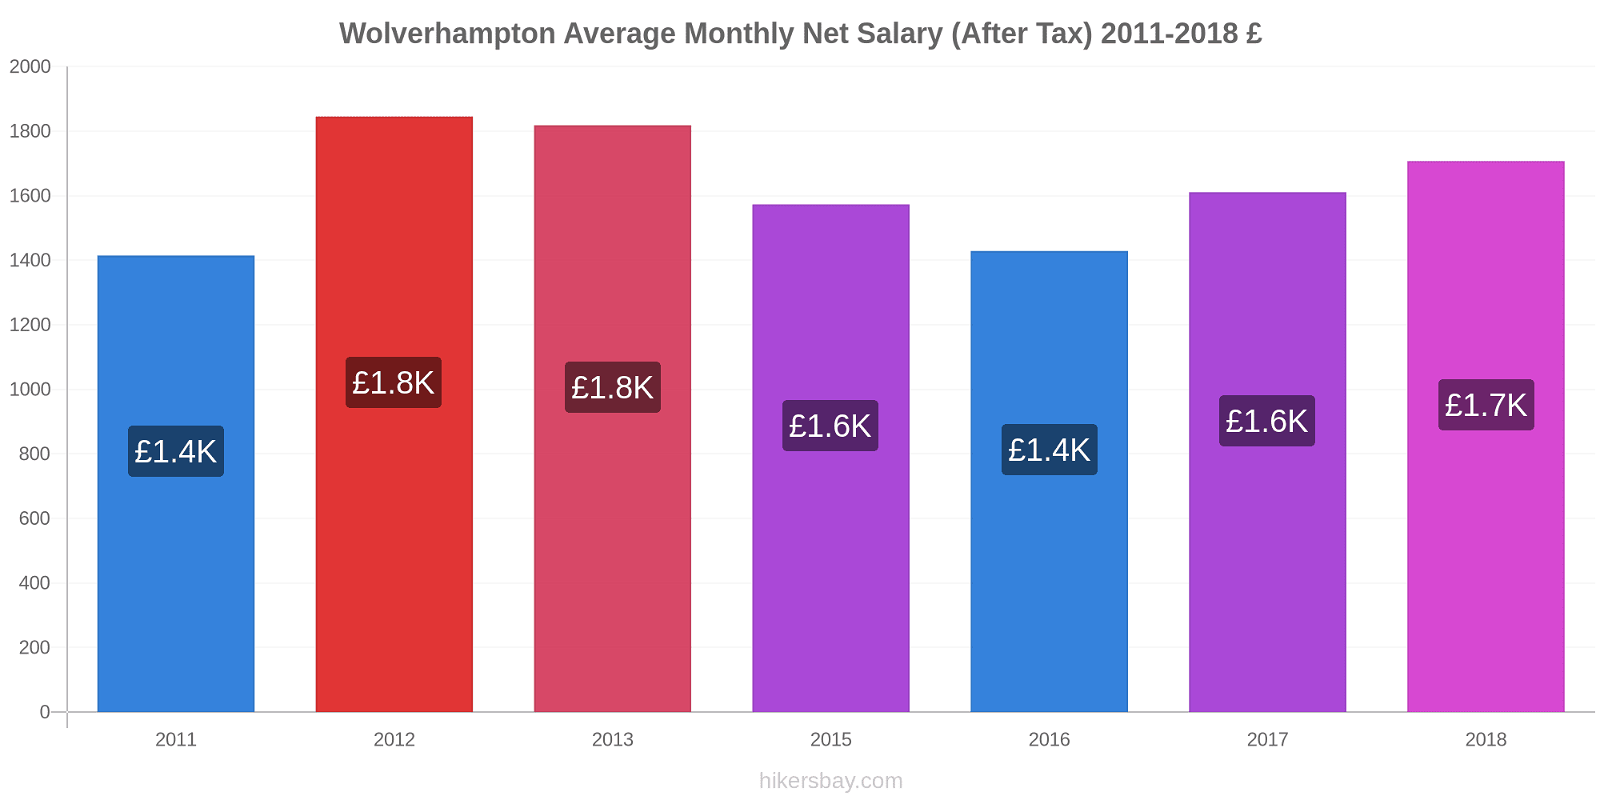 Wolverhampton price changes Average Monthly Net Salary (After Tax) hikersbay.com